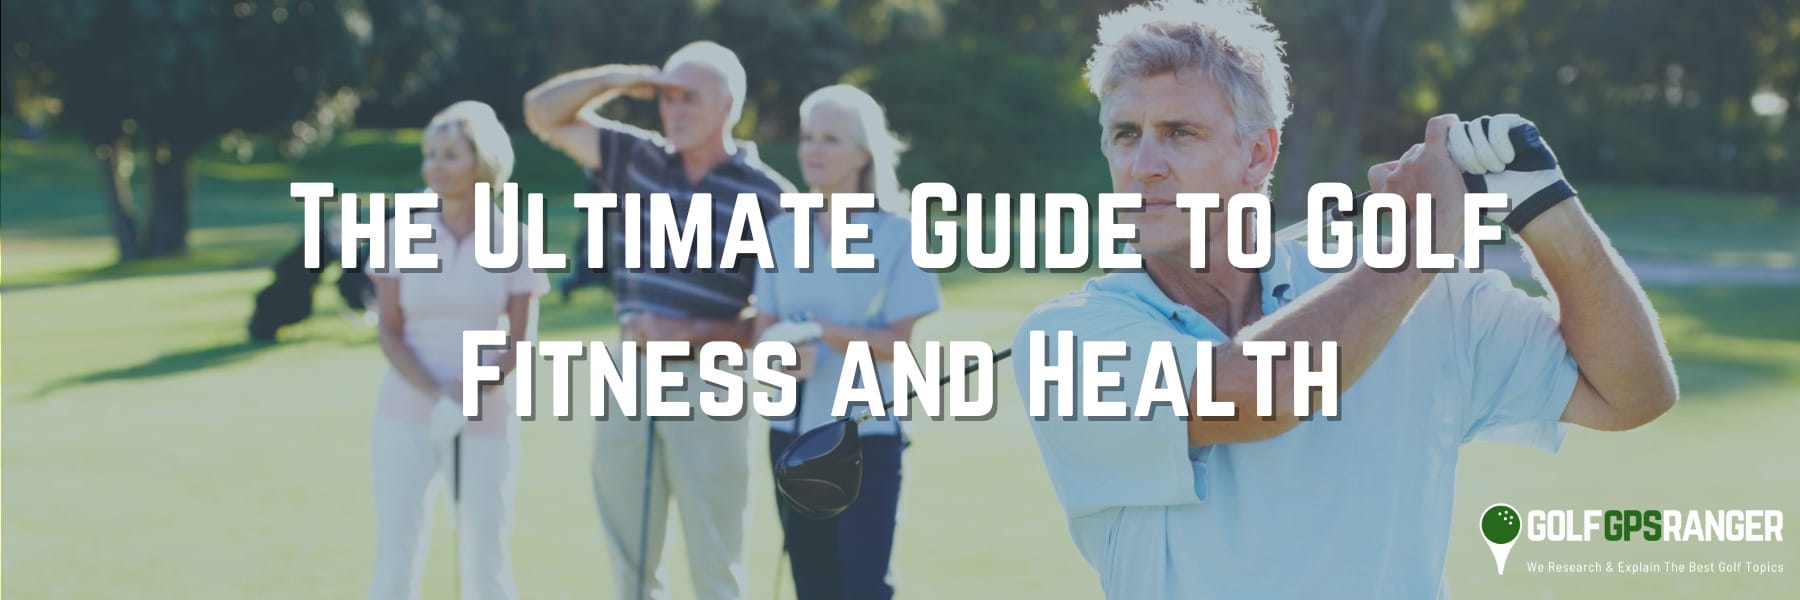 The Ultimate Guide to Golf Fitness and Health